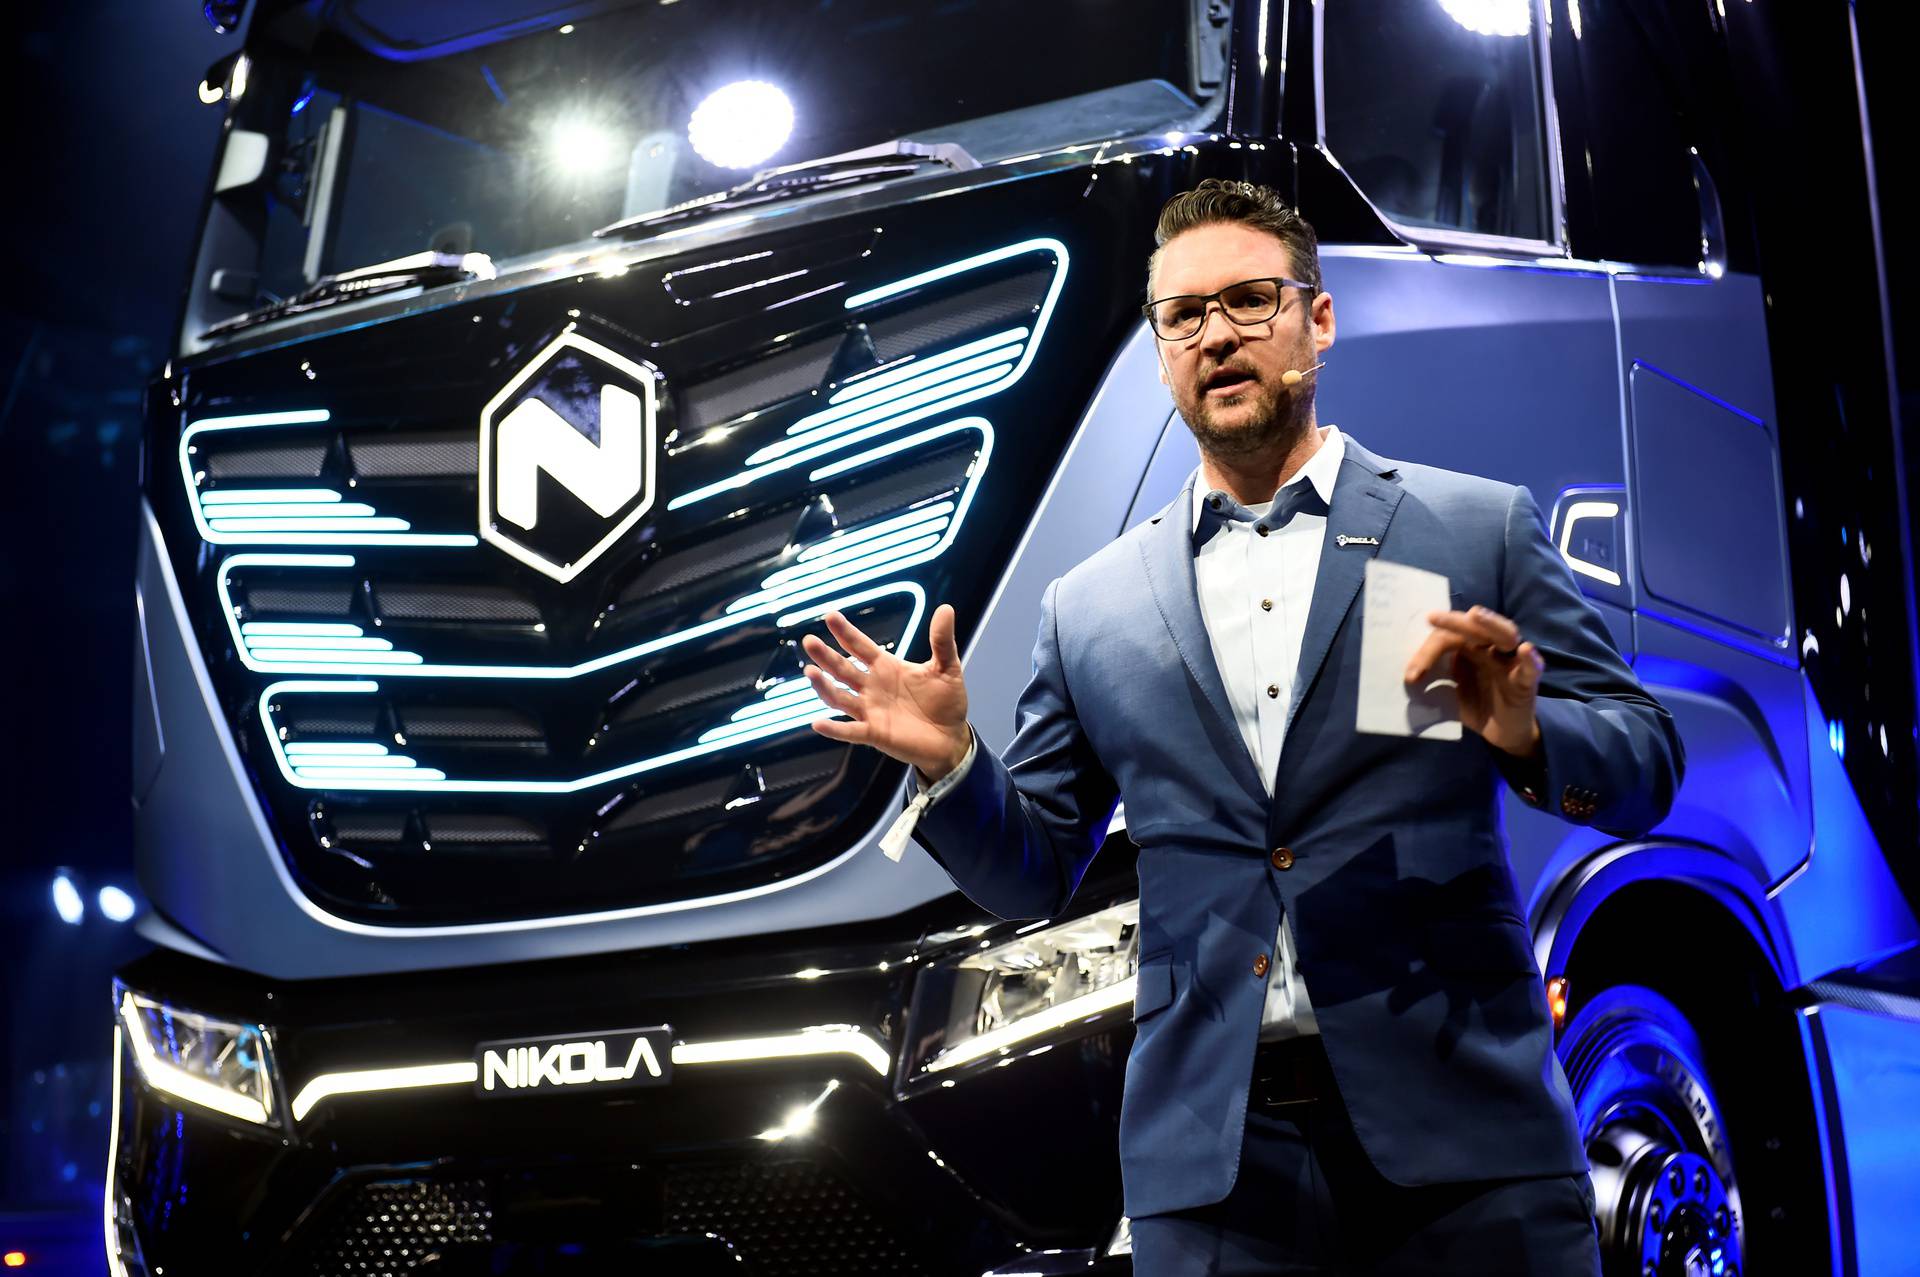 FILE PHOTO: CEO and founder of U.S. Nikola, Trevor Milton speaks during presentation of its new full-electric and hydrogen fuel-cell battery trucks in partnership with CNH Industrial, at an event in Turin